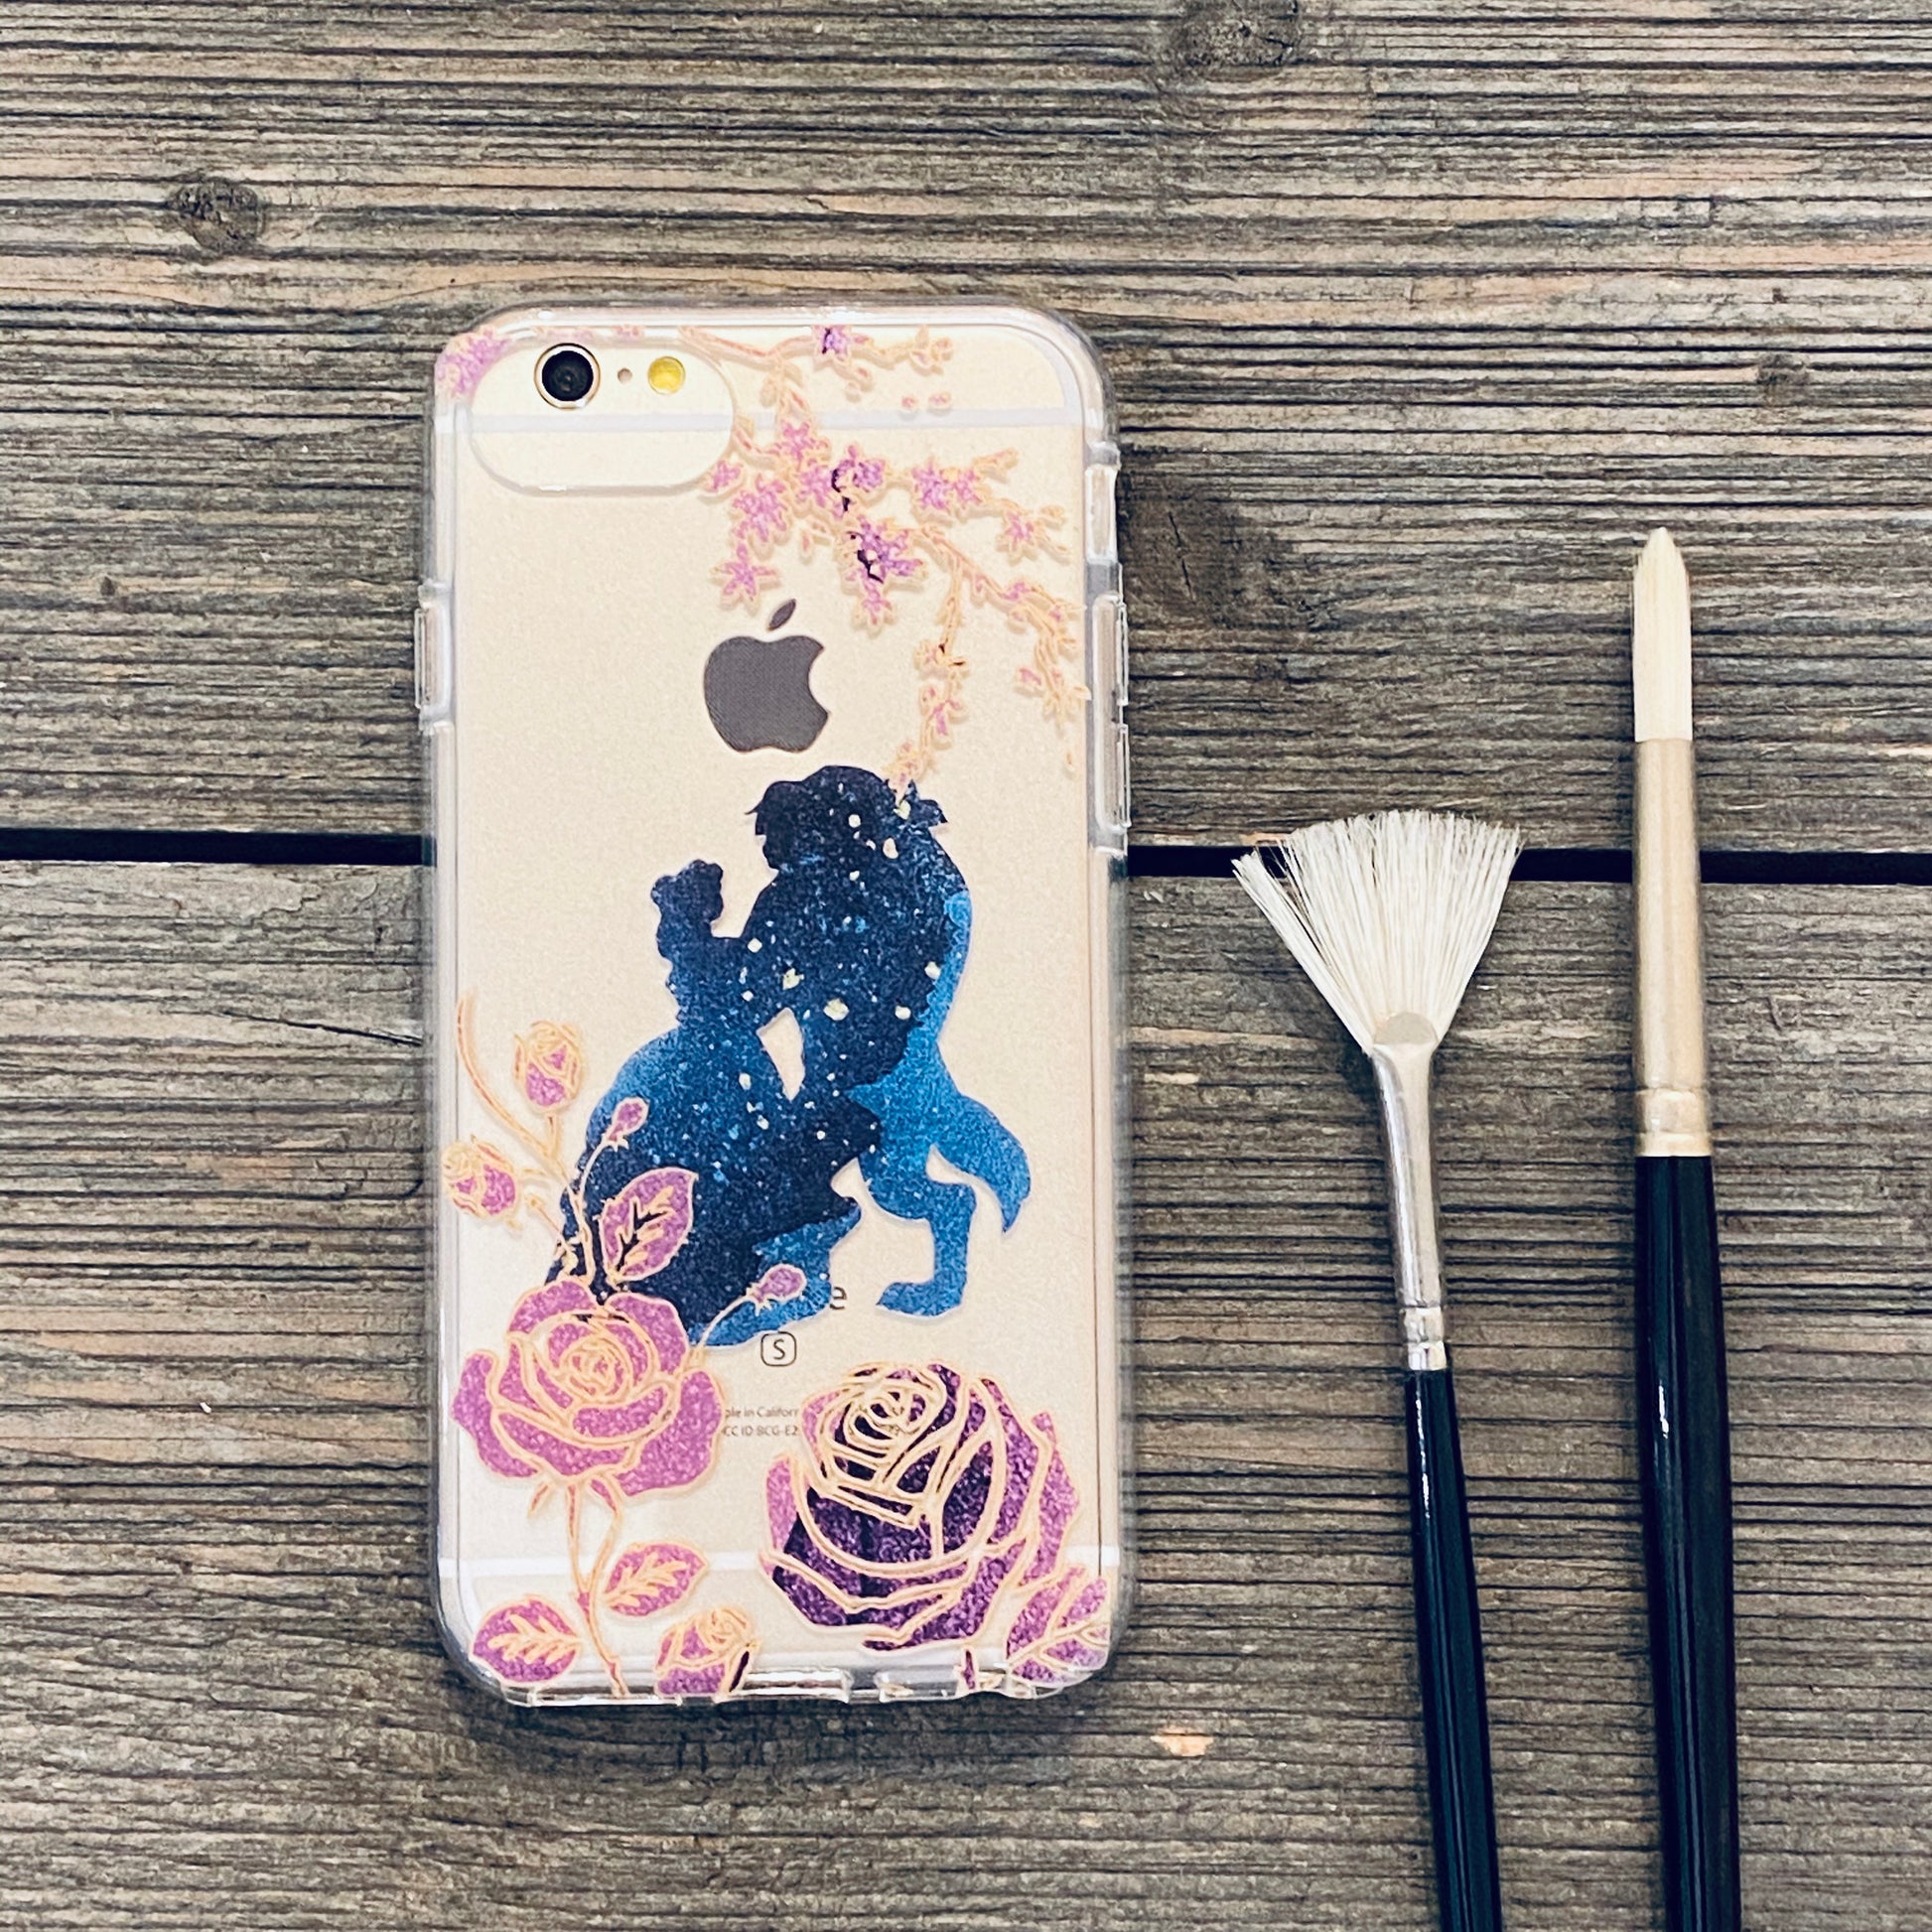 beauty and beast dancing phone case